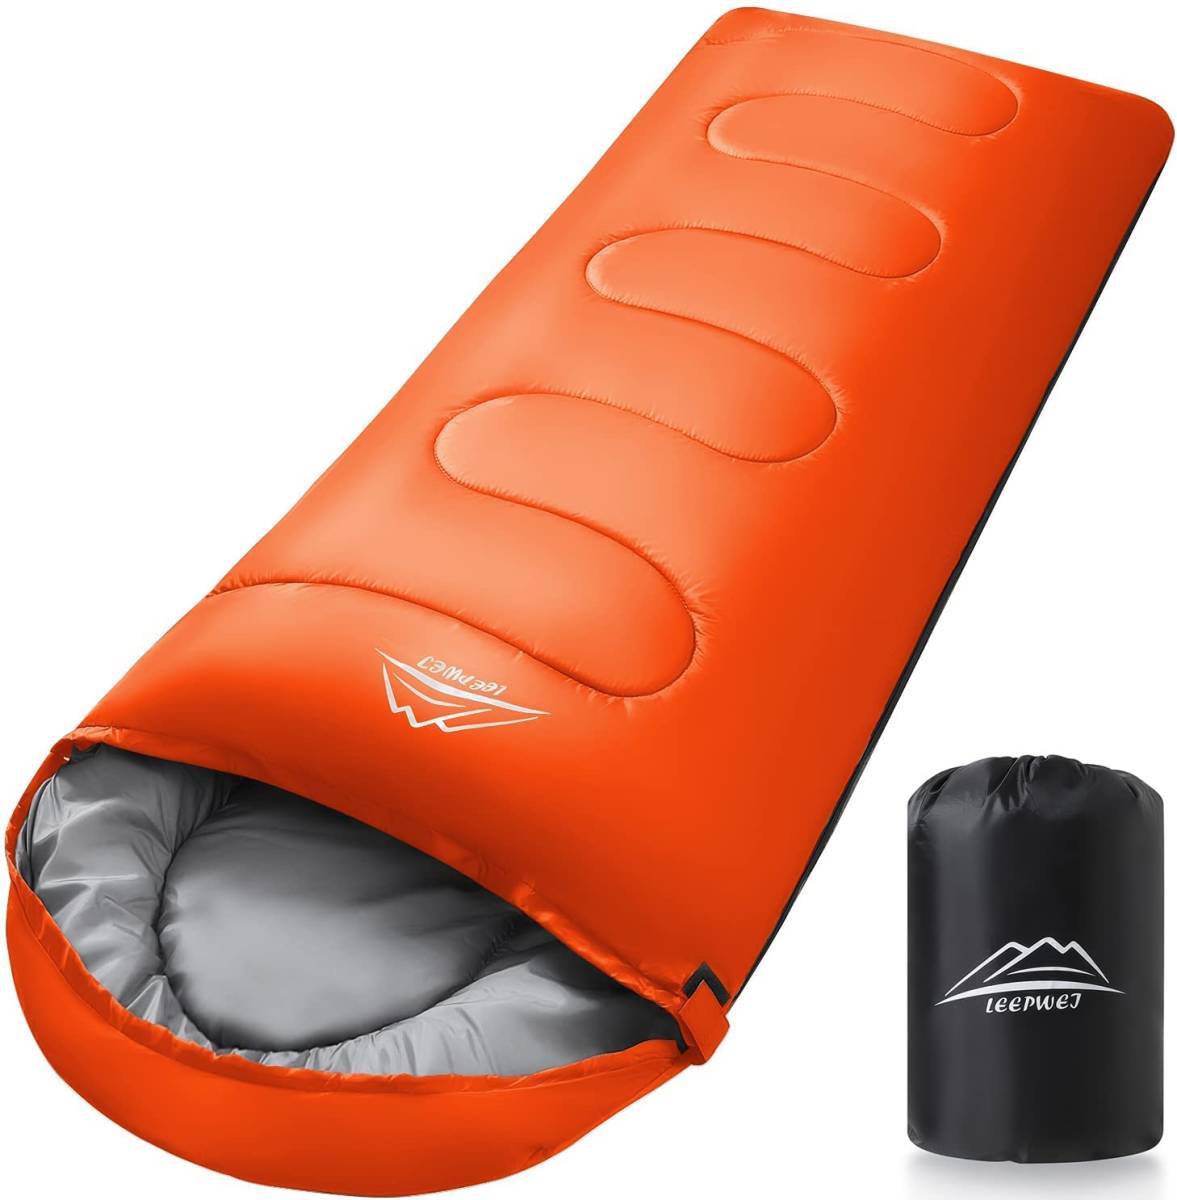  sleeping bag envelope type light weight heat insulation -15 times enduring cold 210T waterproof sleeping bag compact outdoor camp mountain climbing sleeping area in the vehicle disaster prevention for circle wash possible storage sack attaching 1kg